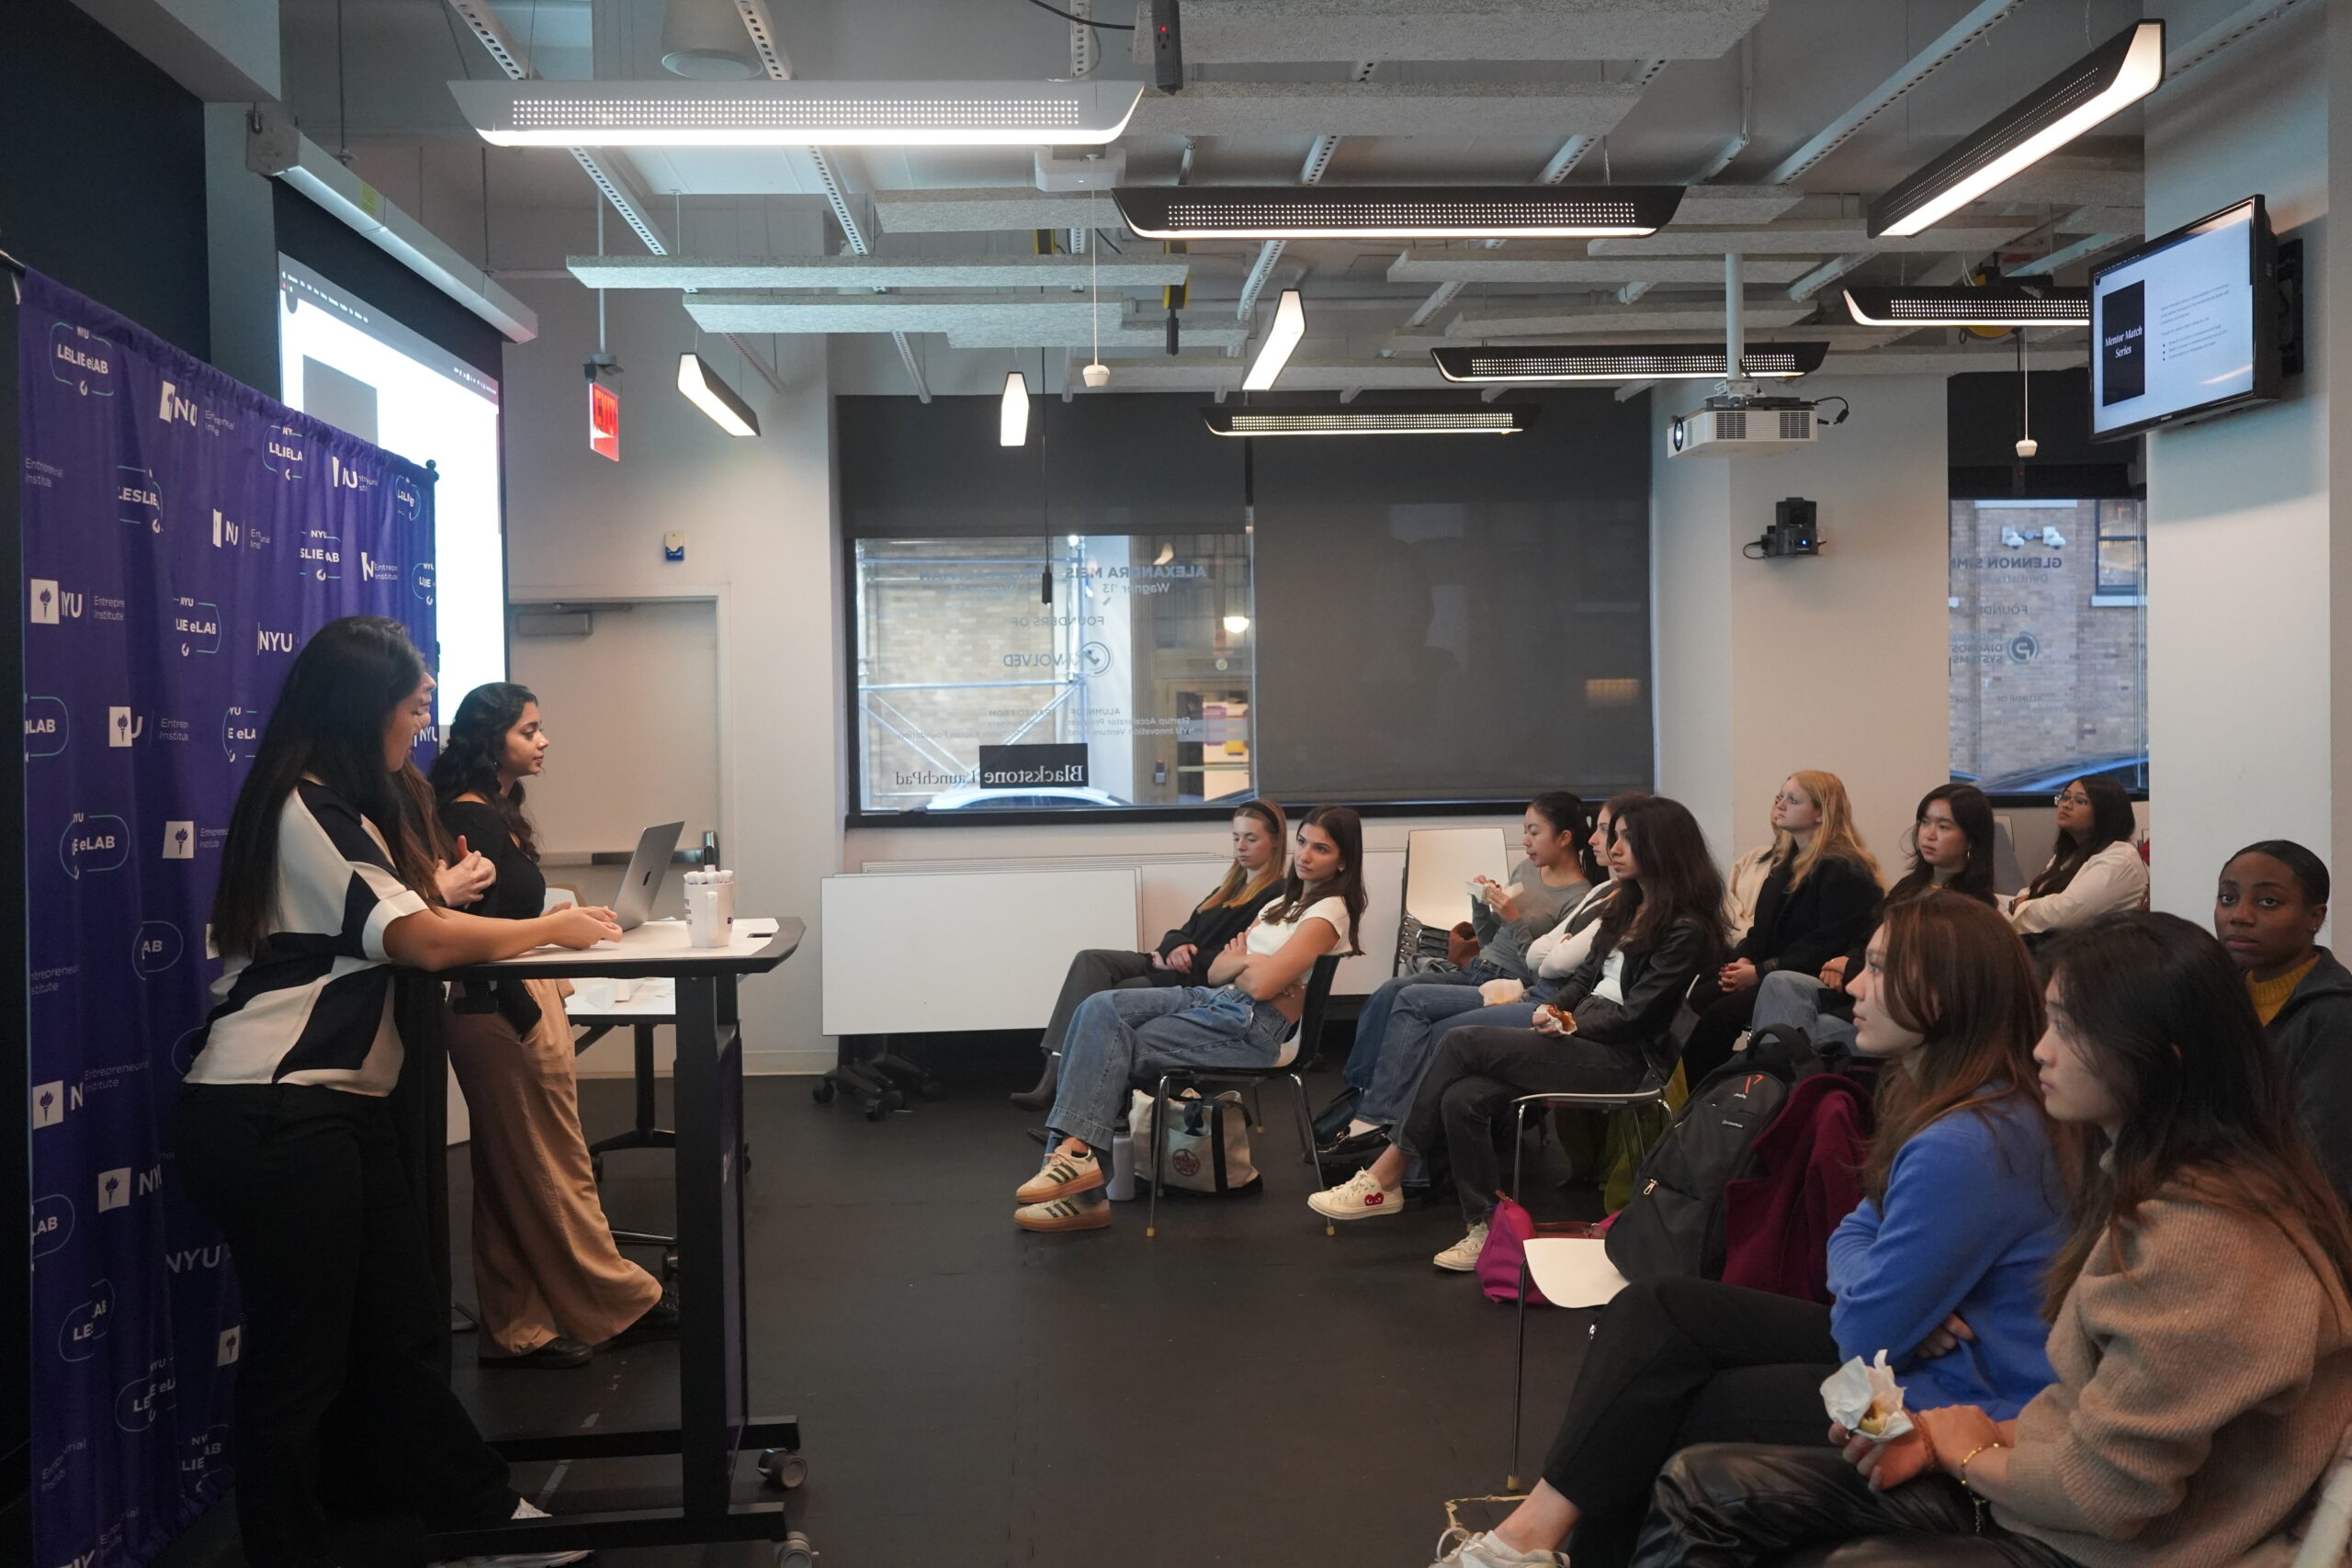 Women Founders’ first event presentation.